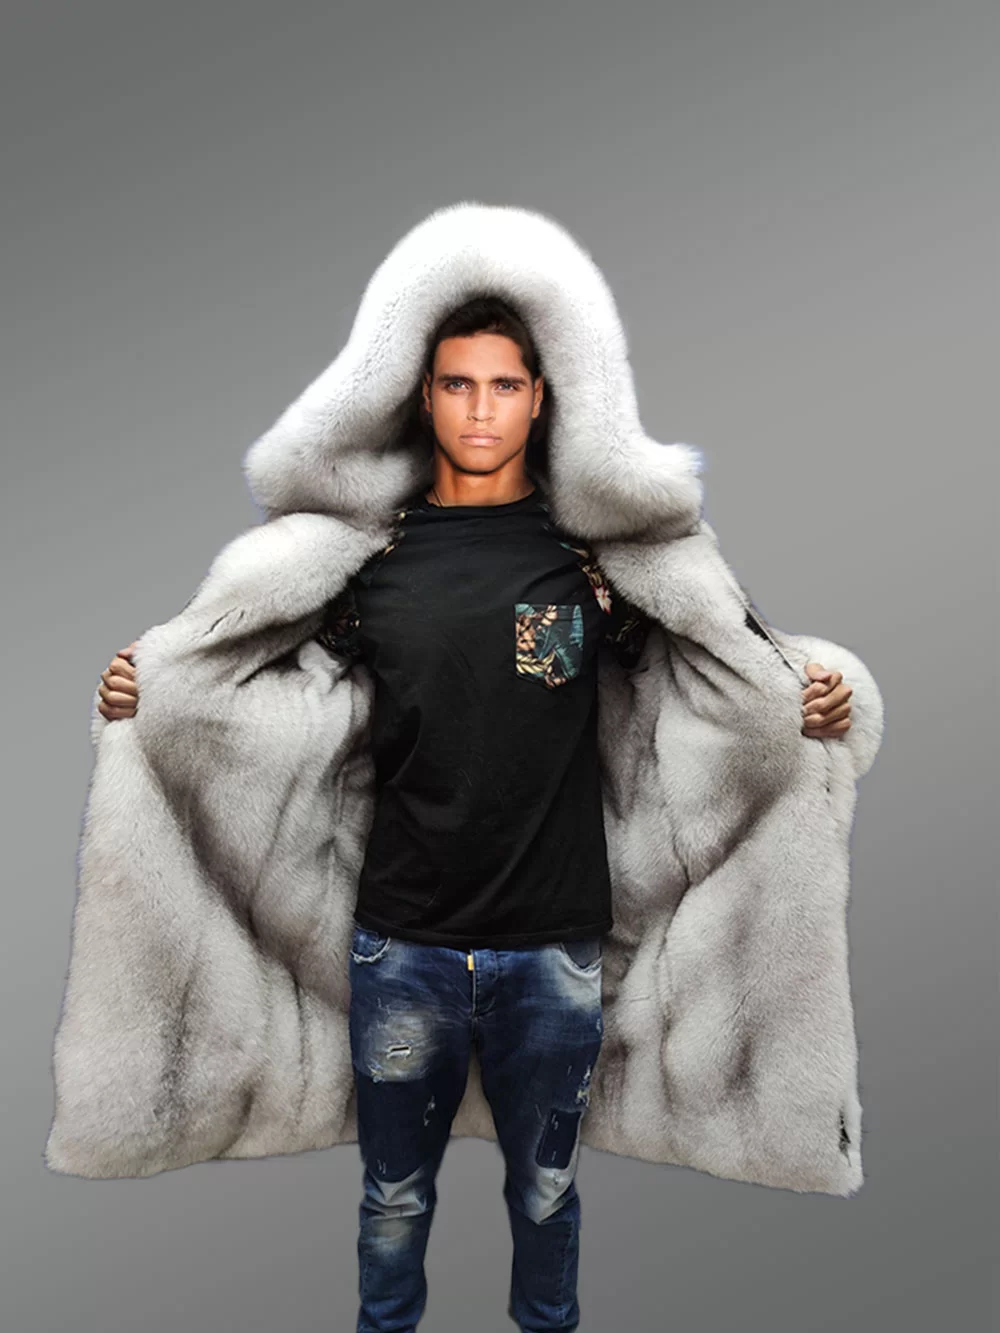 LUXURY SILVER FOX Jacket Fur Coat With Whole Skins Fur 